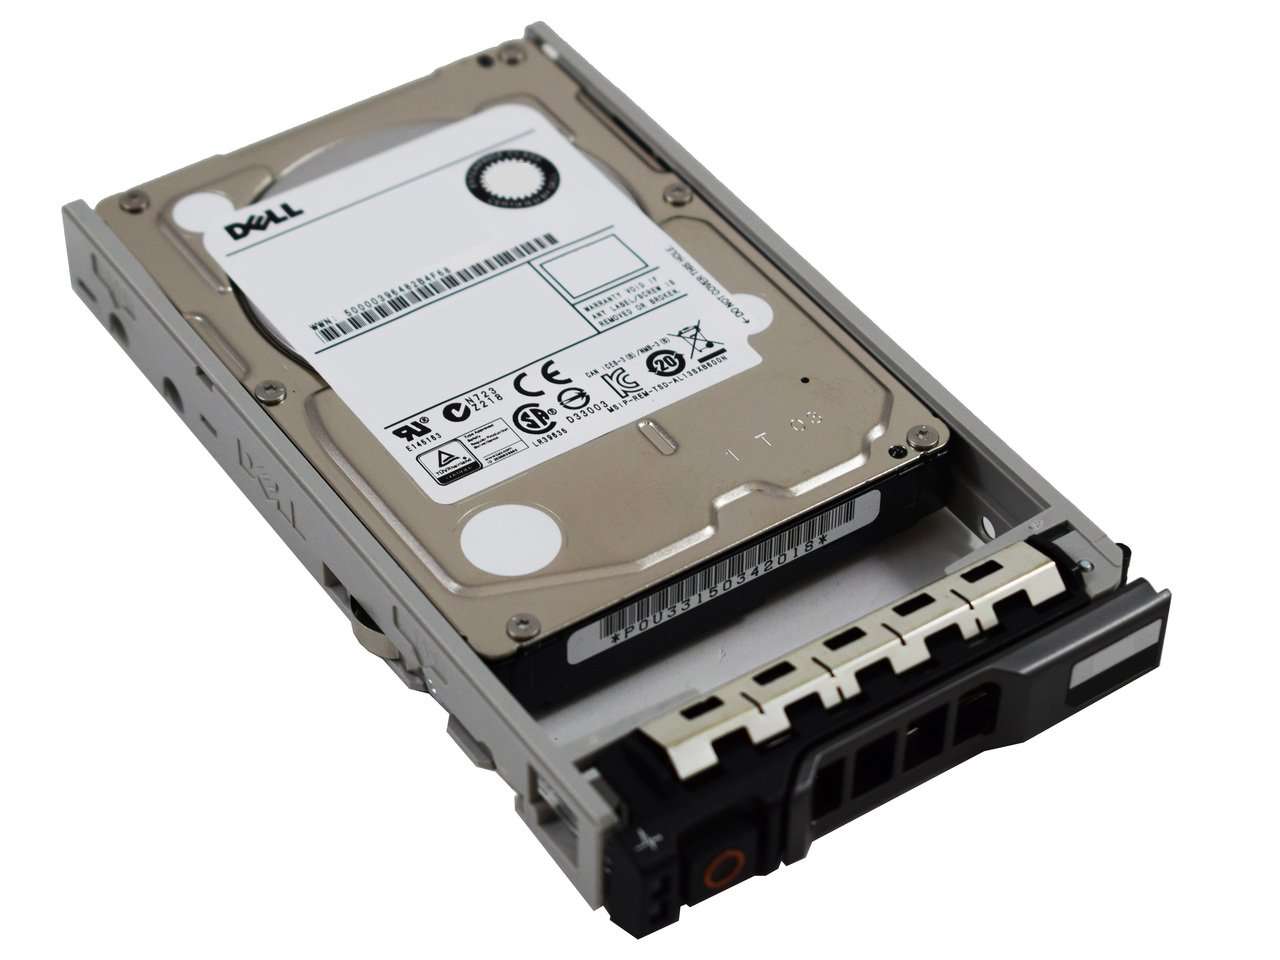 Dell G13 400-AESH 600GB 15K RPM SAS 6Gb/s 512n 2.5" Manufacturer Recertified HDD